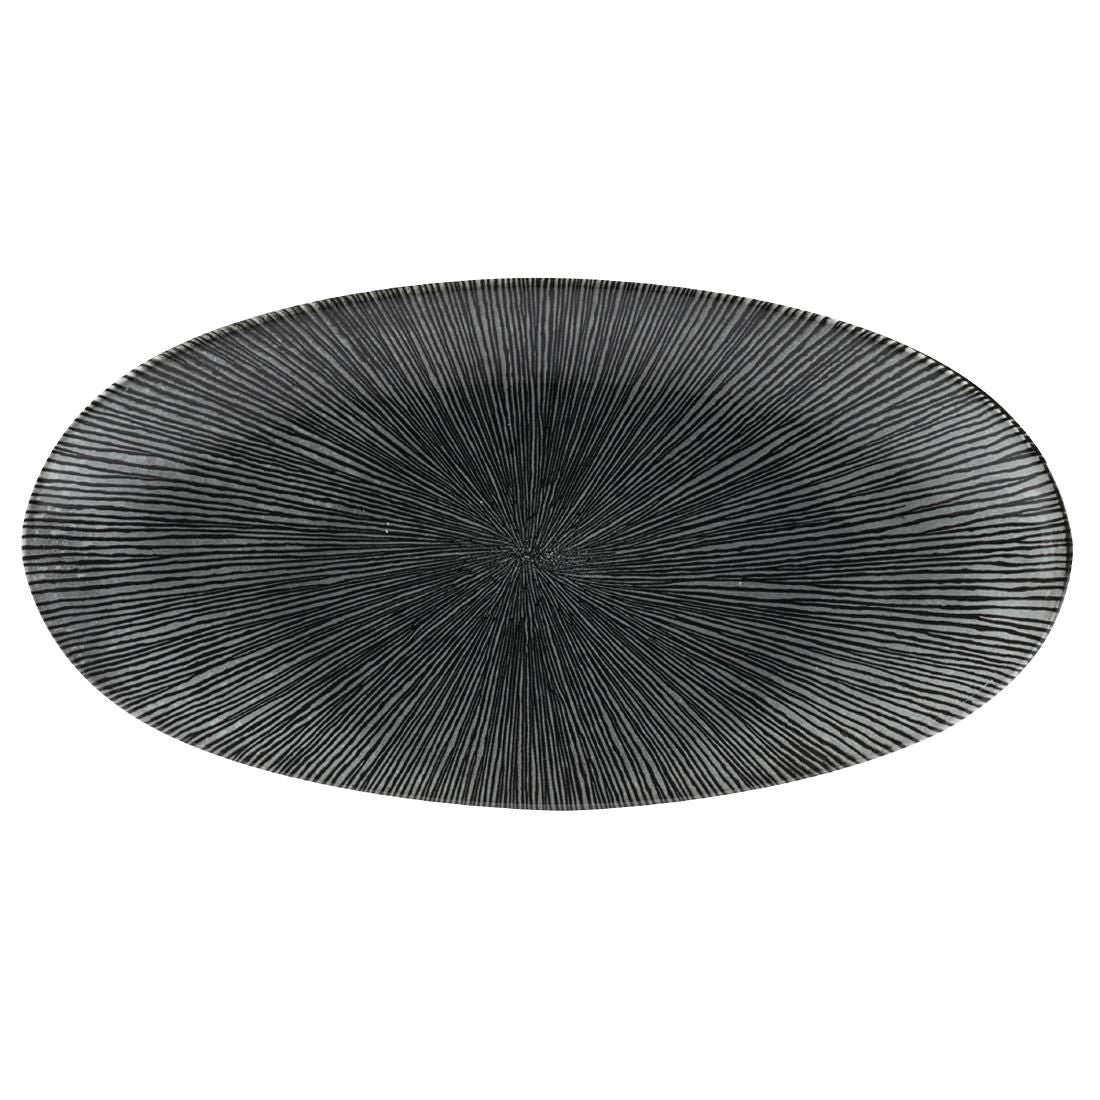 FC108 Churchill Studio Prints Agano Oval Chefs Plates Black 347 x 173mm (Pack of 6) JD Catering Equipment Solutions Ltd